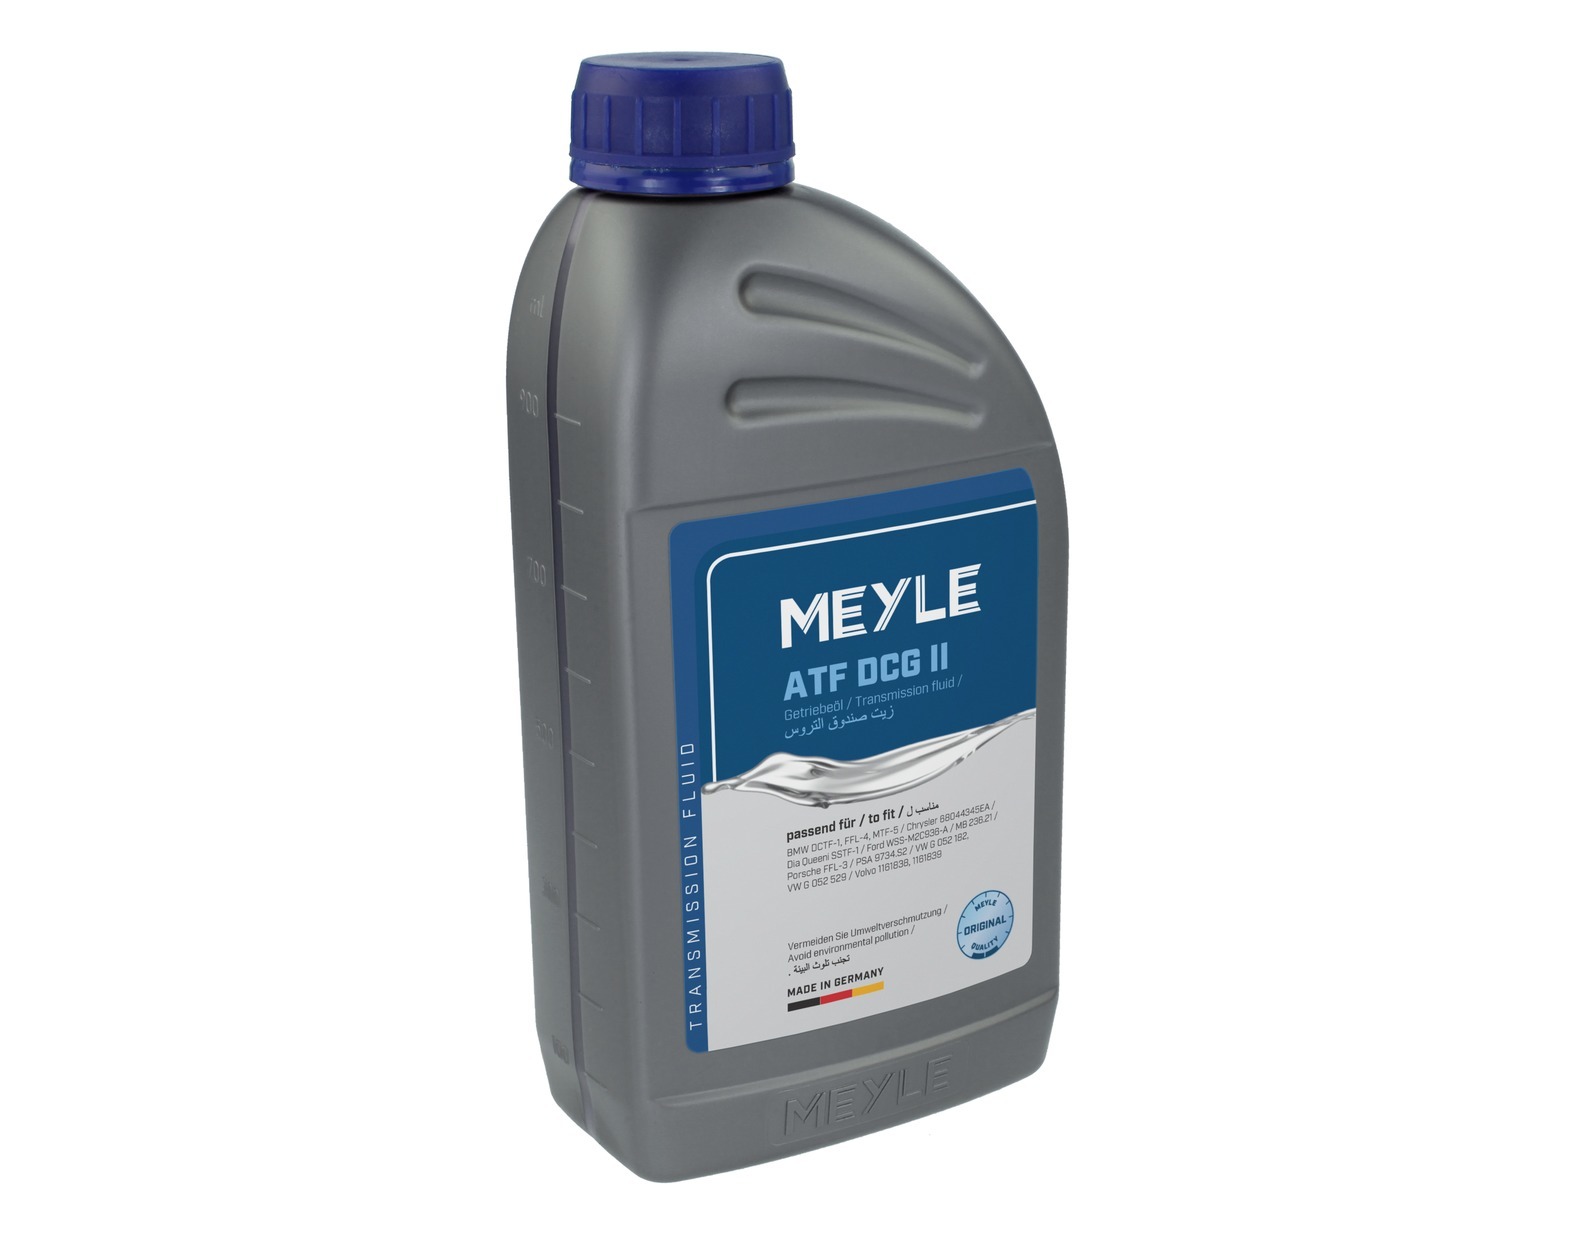 MEYLE 014 019 3700 Масло ATF 1л. (Automatic Transmission Fluid) (Жёлтое) АКПП-dsg /made in Germany